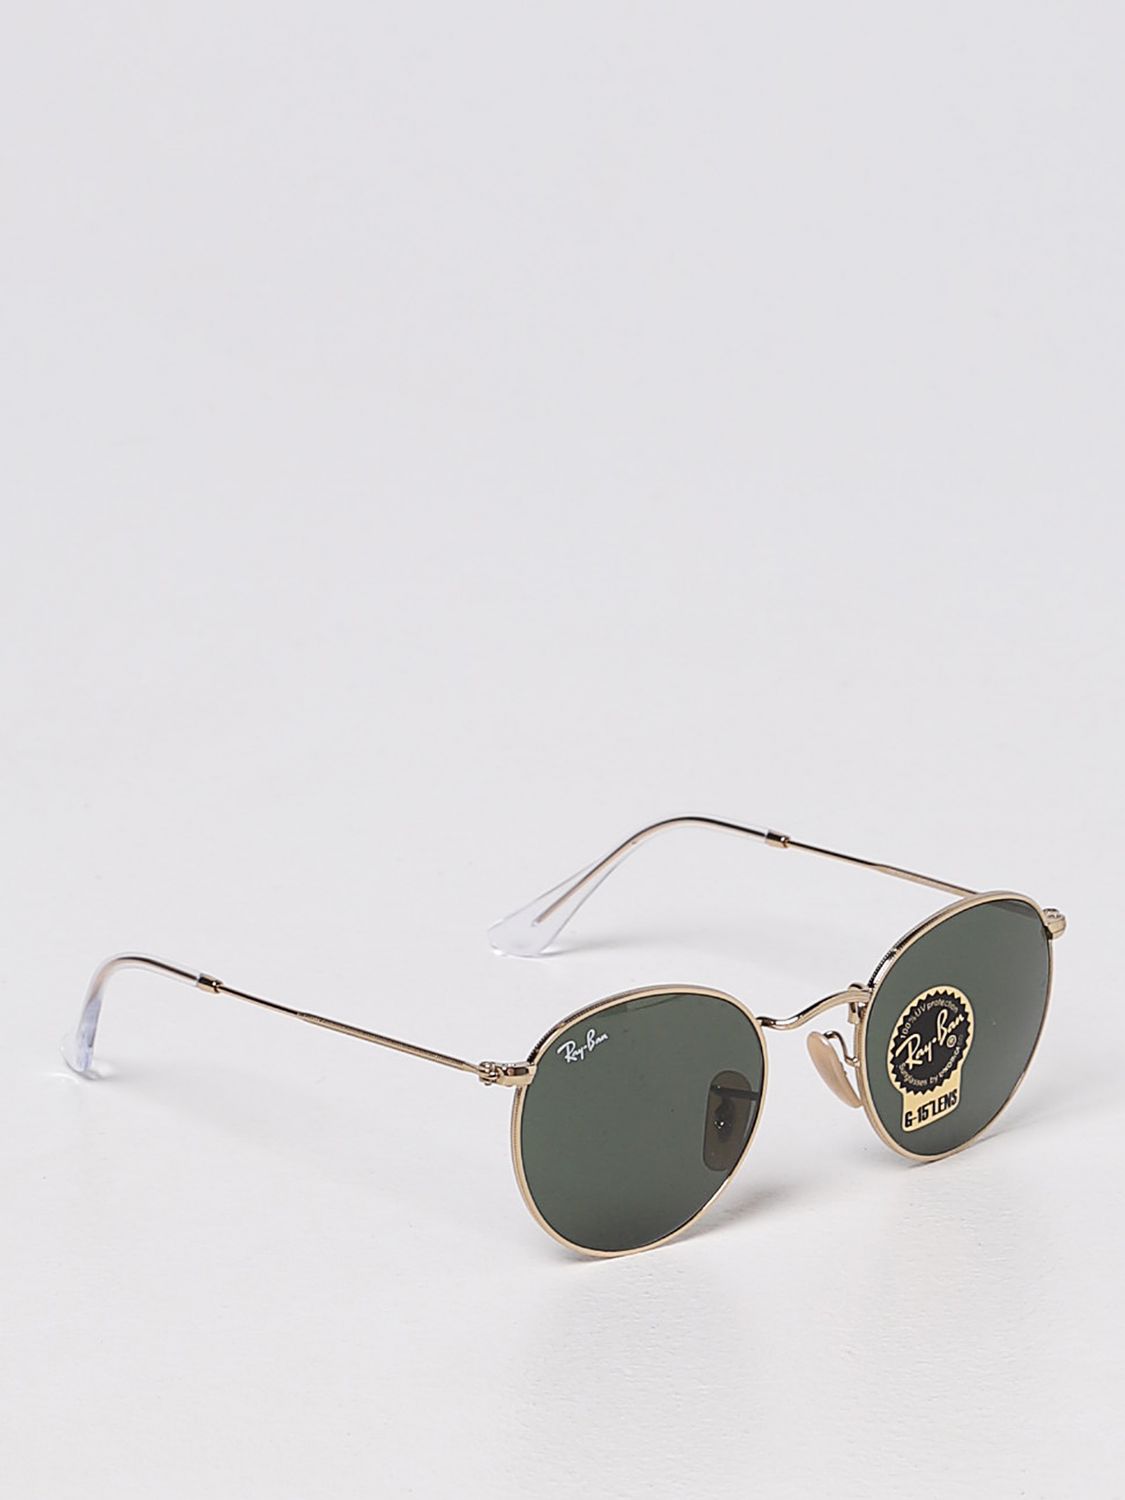 Lunettes Ray-Ban: Lunettes femme Ray-ban vert 1